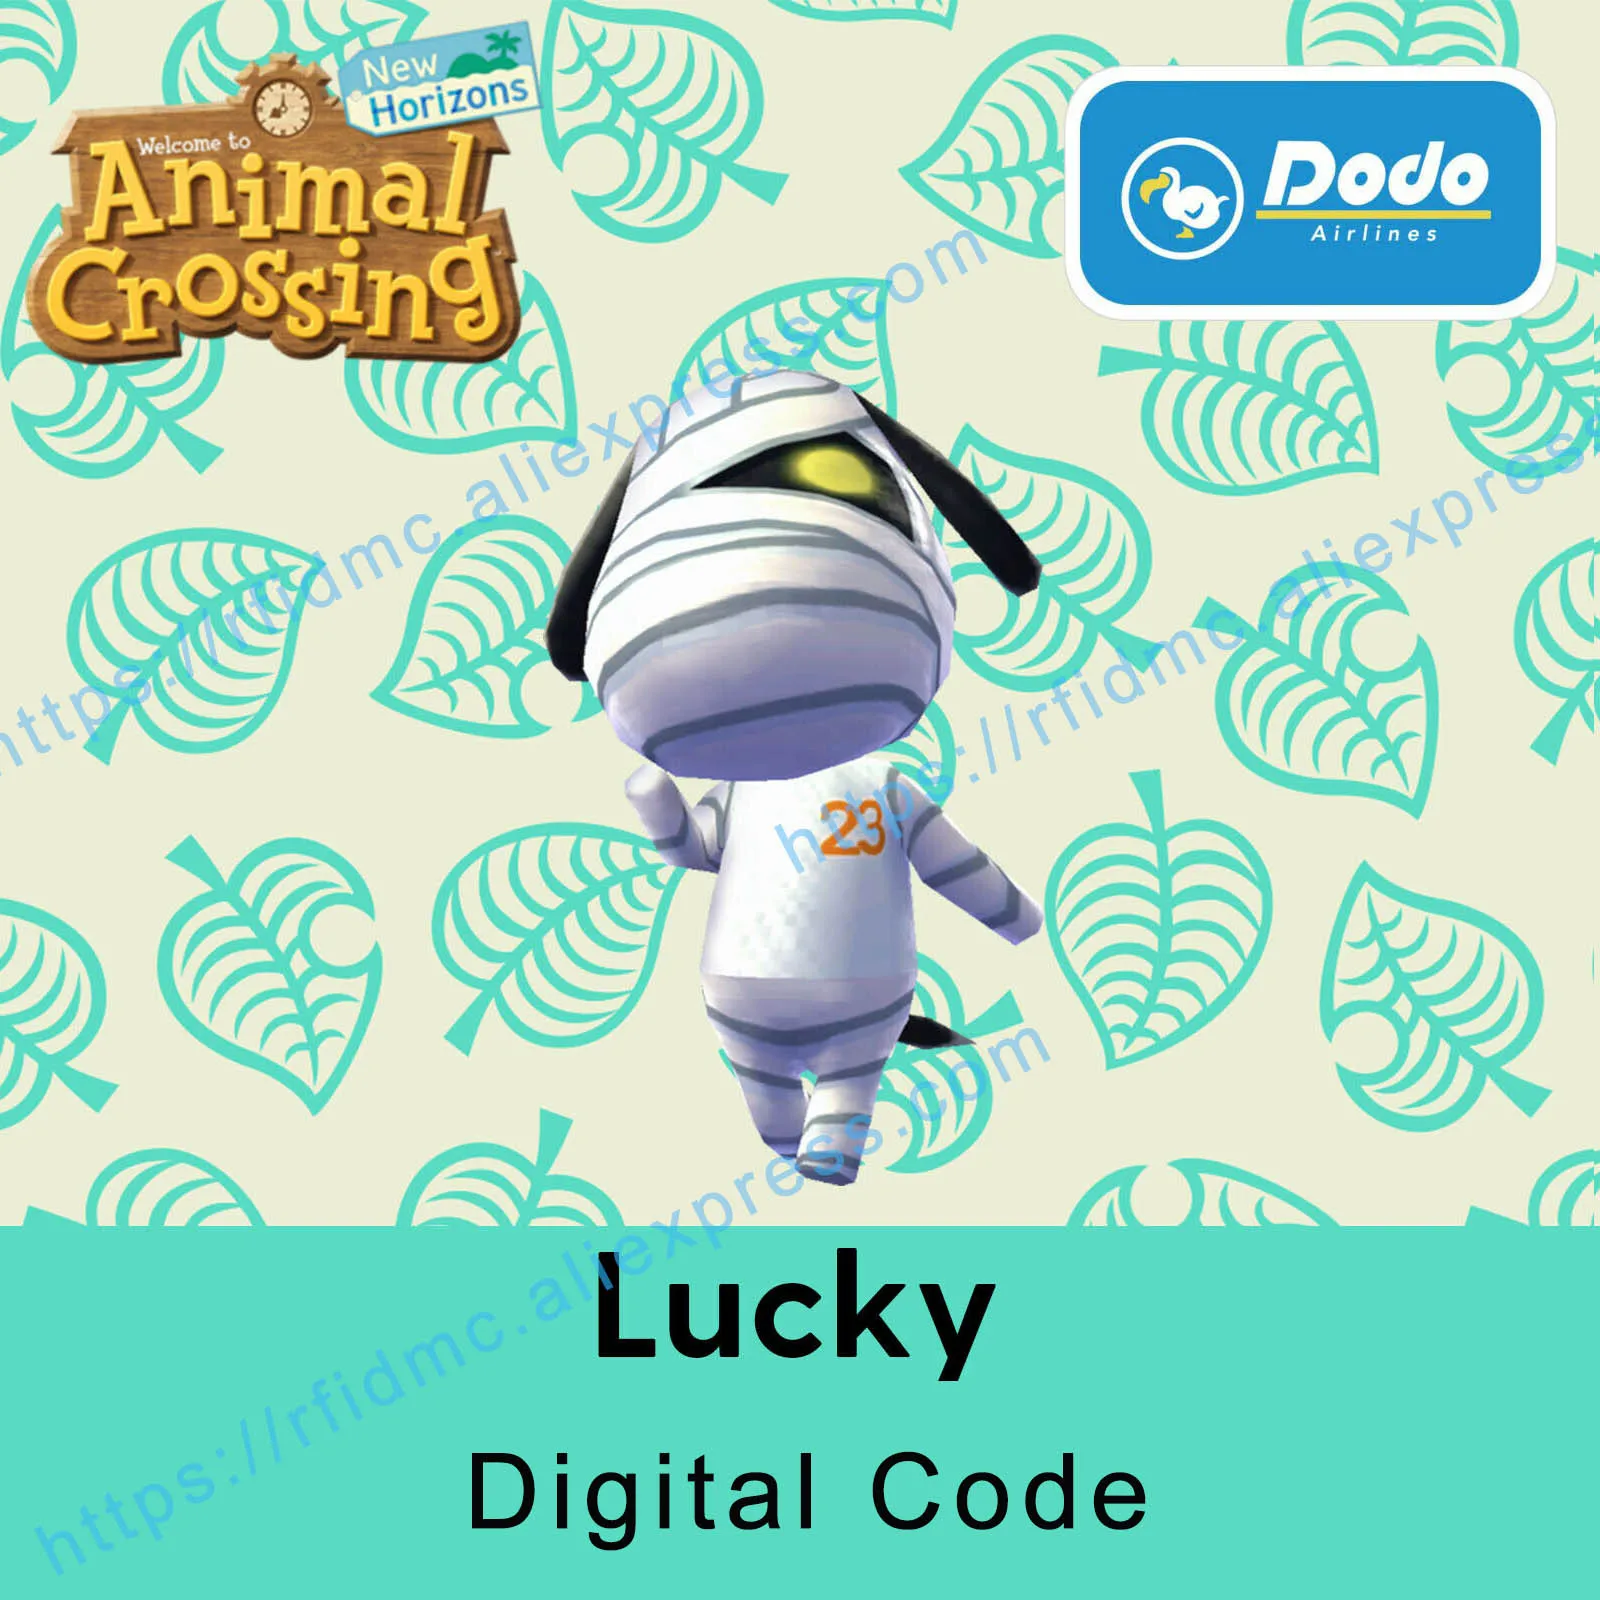 Lucky Animal Crossing New Horizons Online Recharge Service Do Not Support Refunds Not Amiibo Card Access Control Cards Aliexpress